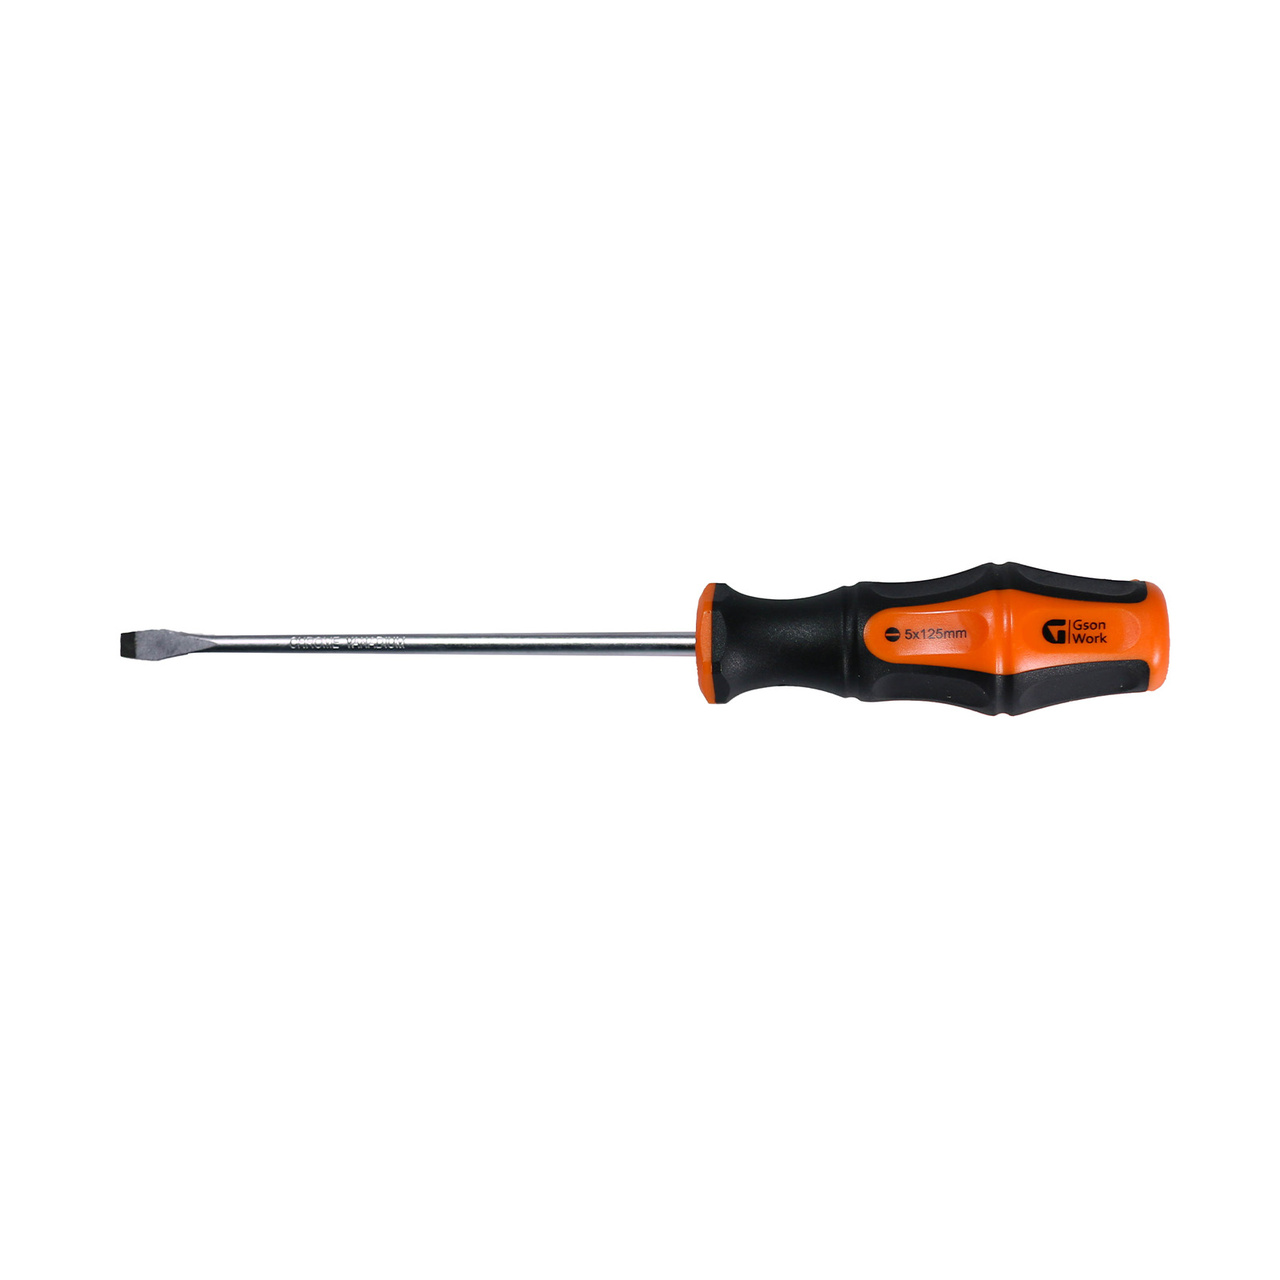 Slotted Screwdriver 5 x 125 mm